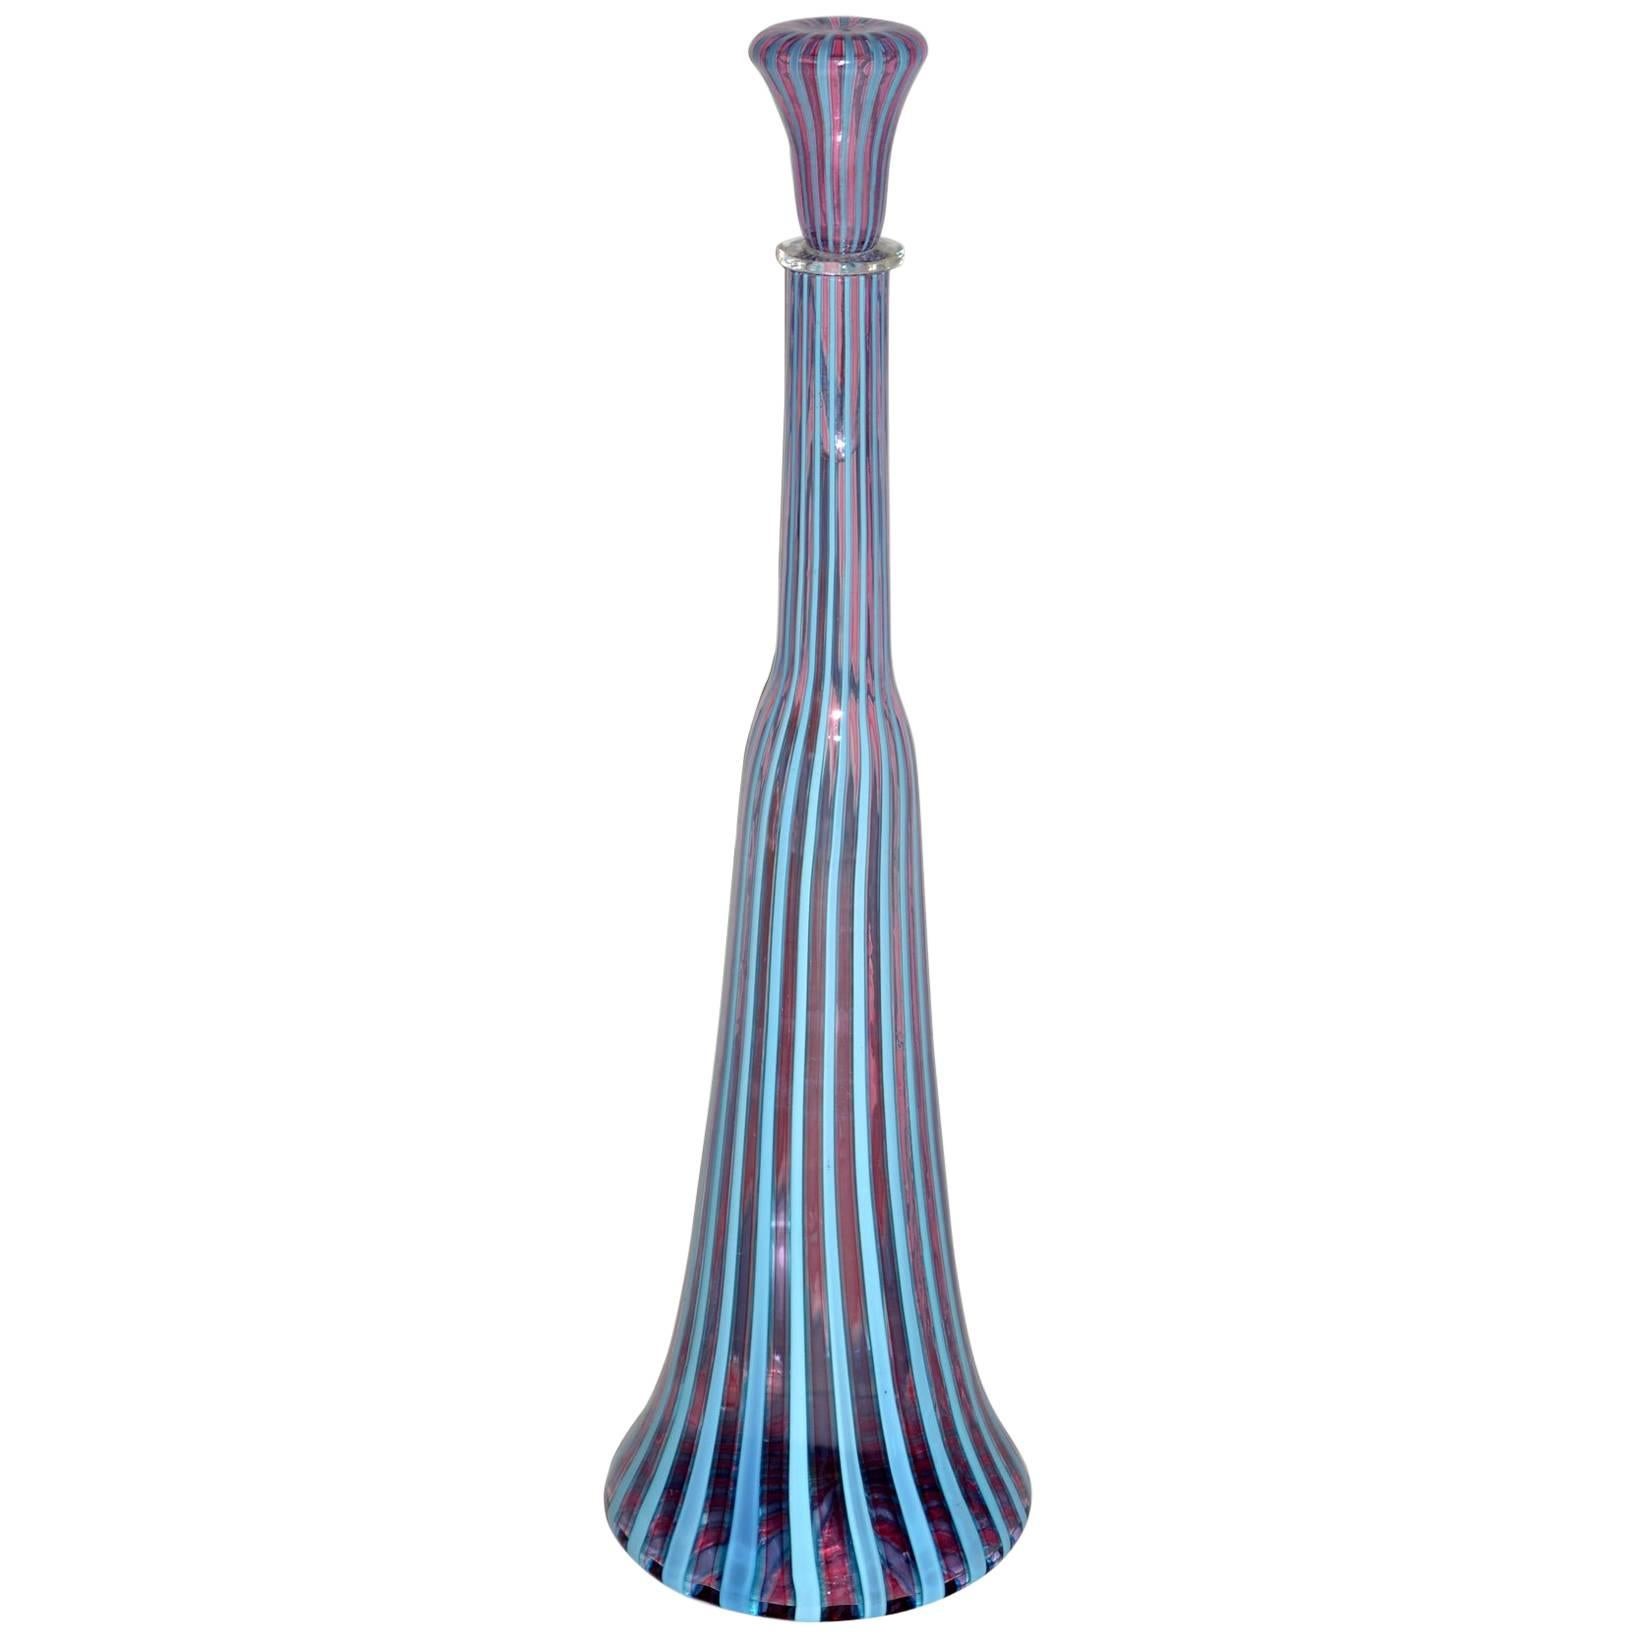  Murano Blown Glass Decanter Attributed to Vetreria Fratelli Toso Signed 